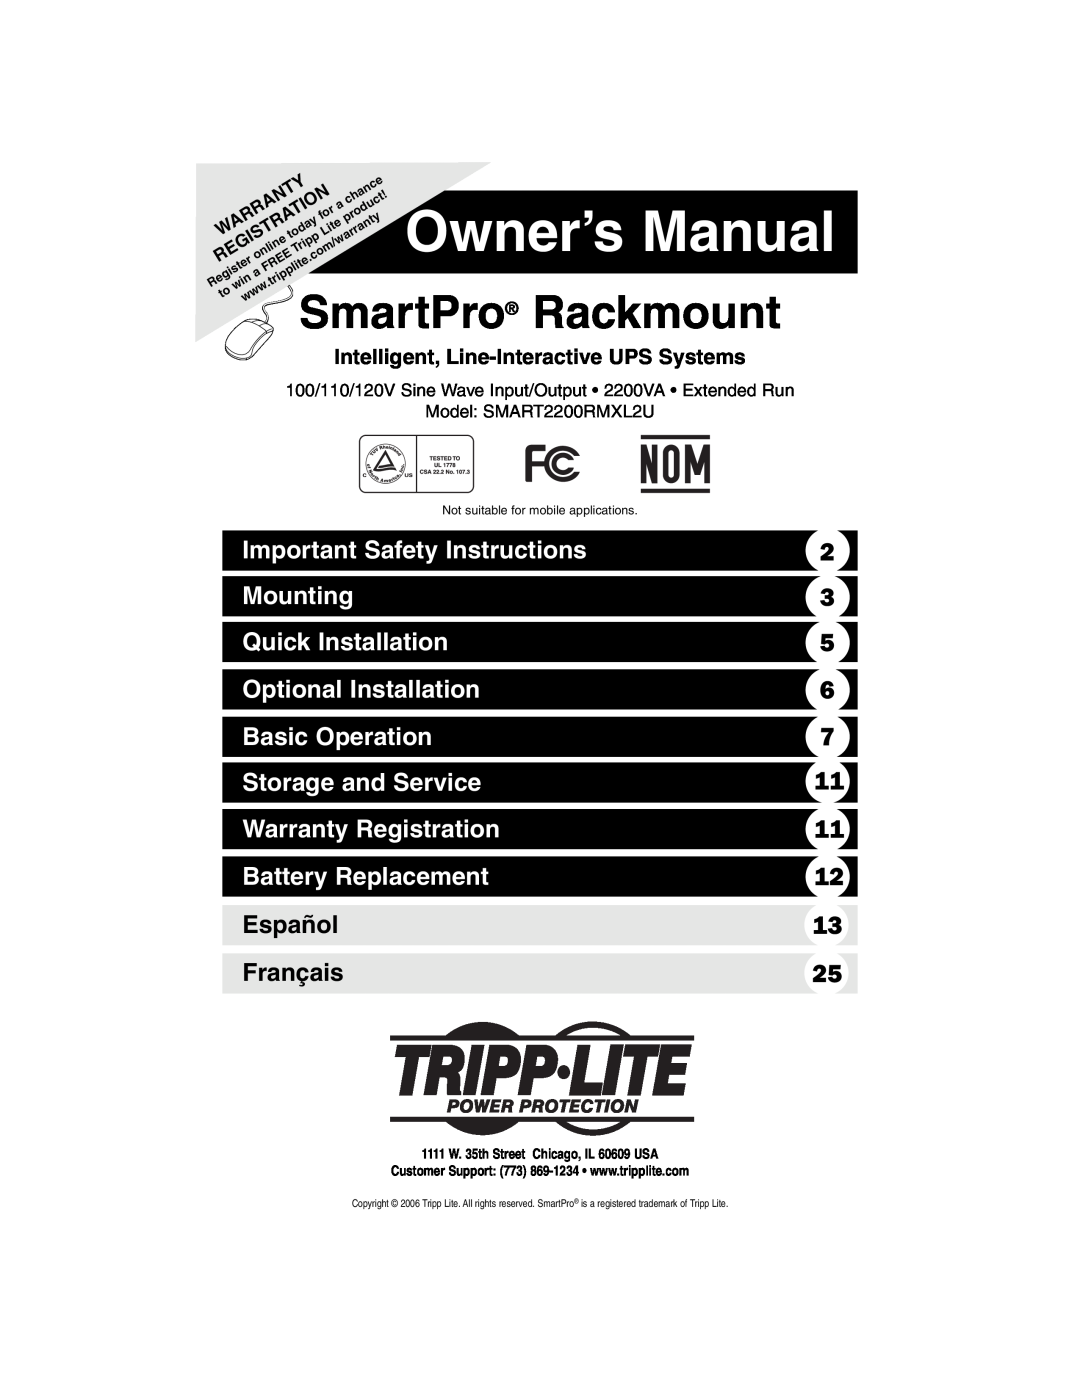 Tripp Lite 1400-3000 VA owner manual Important Safety Instructions, Mounting, Quick Installation, Optional Installation 